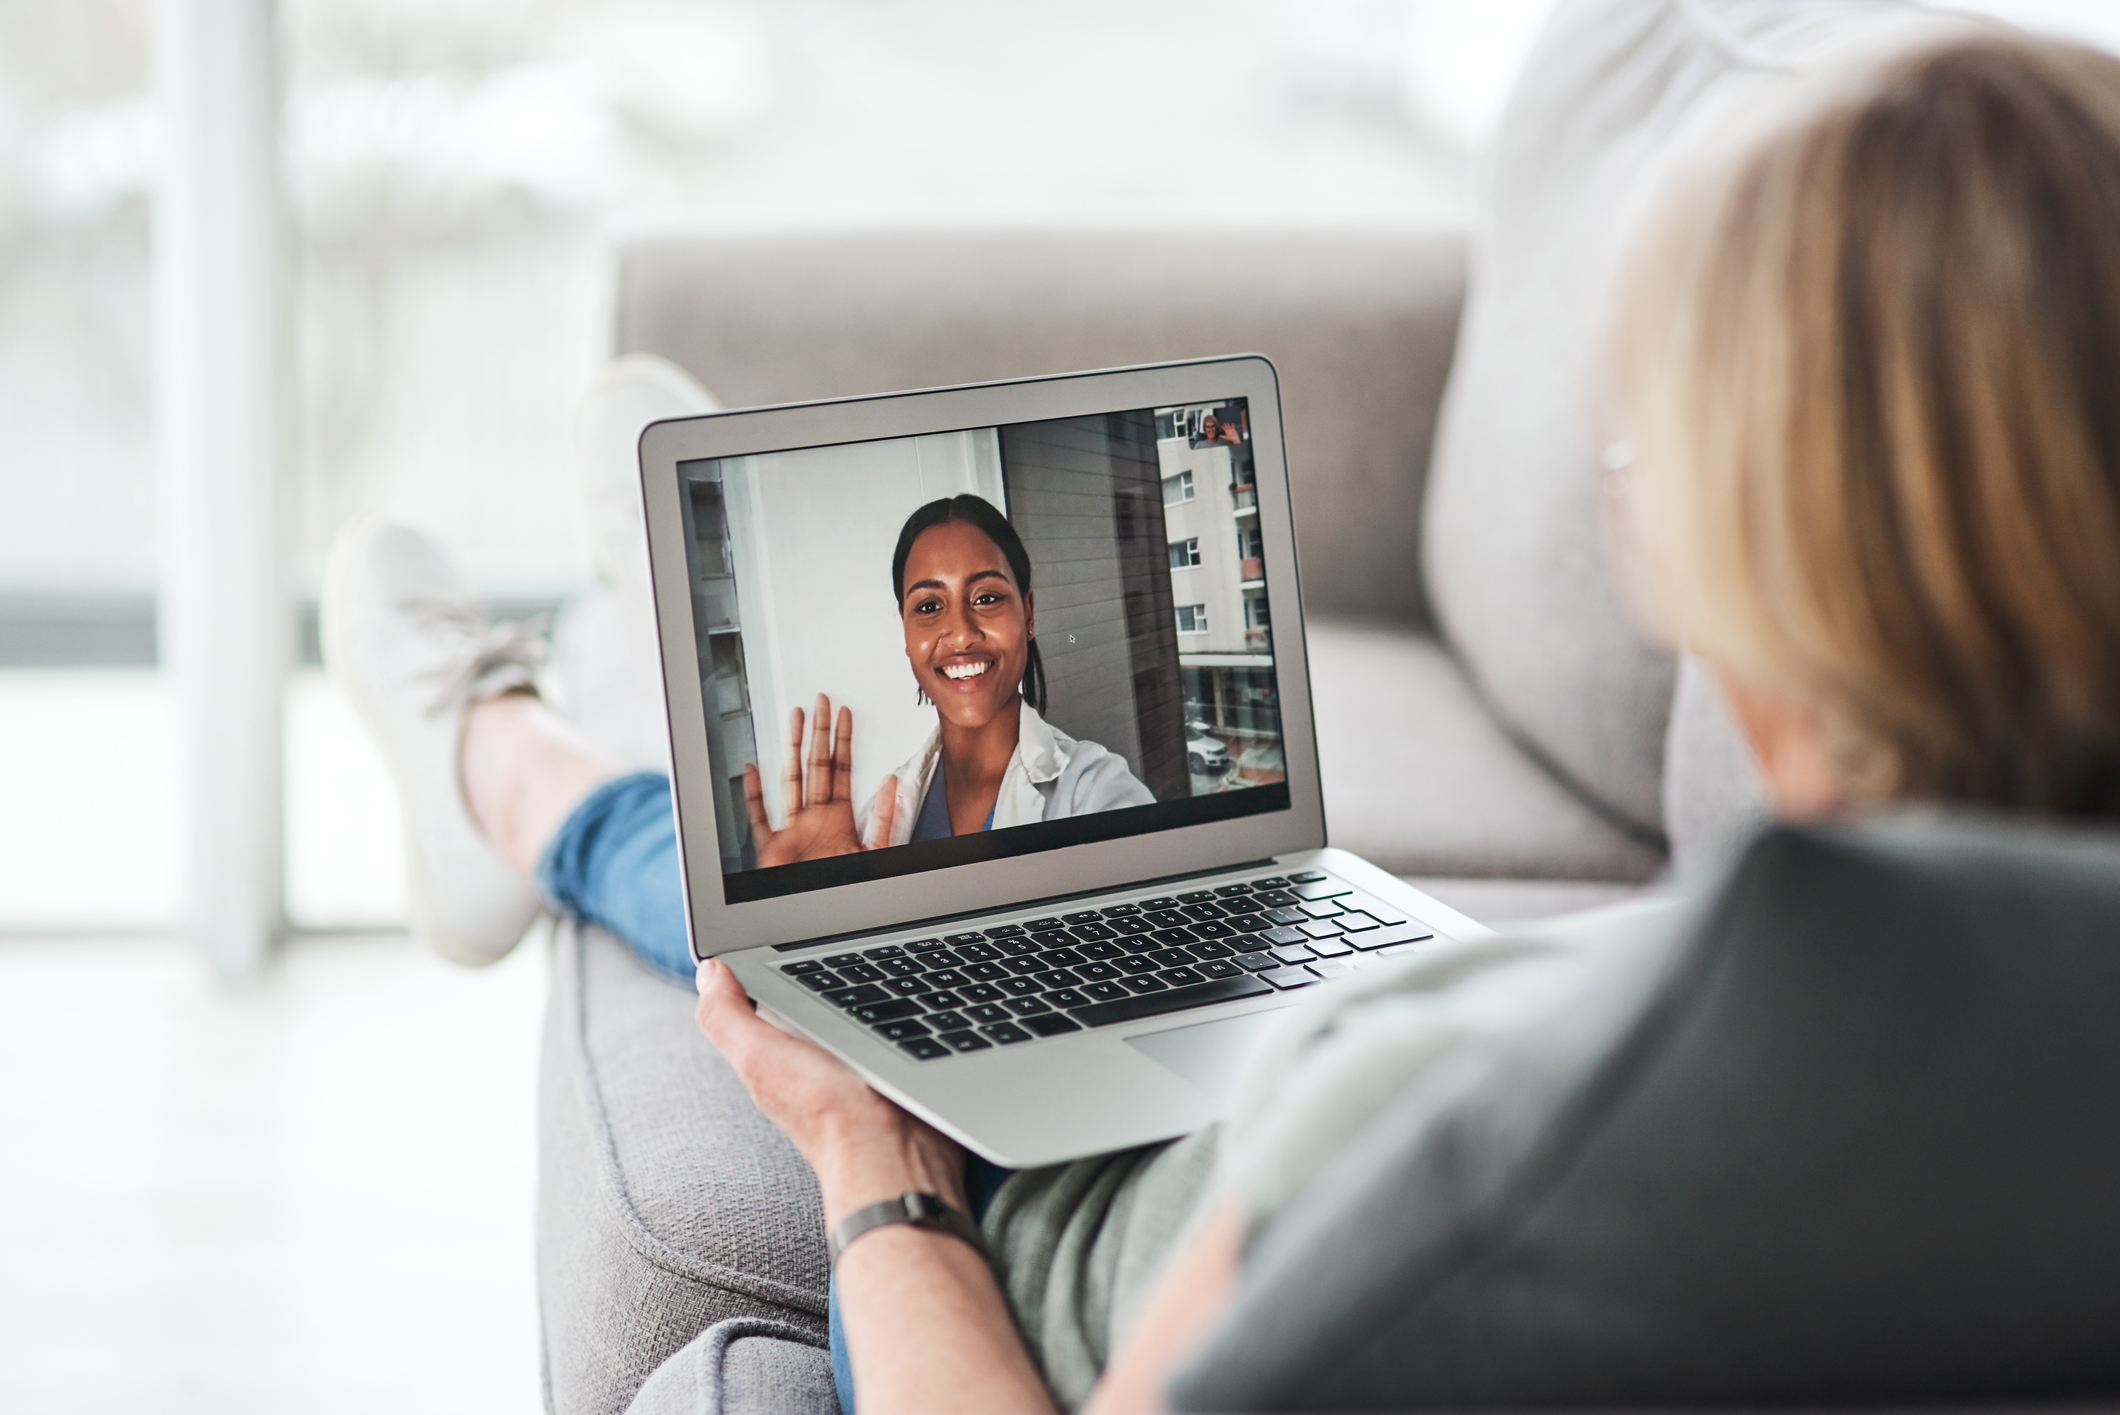 Medical professional waving at patient through a laptop during a telehealth appointment.